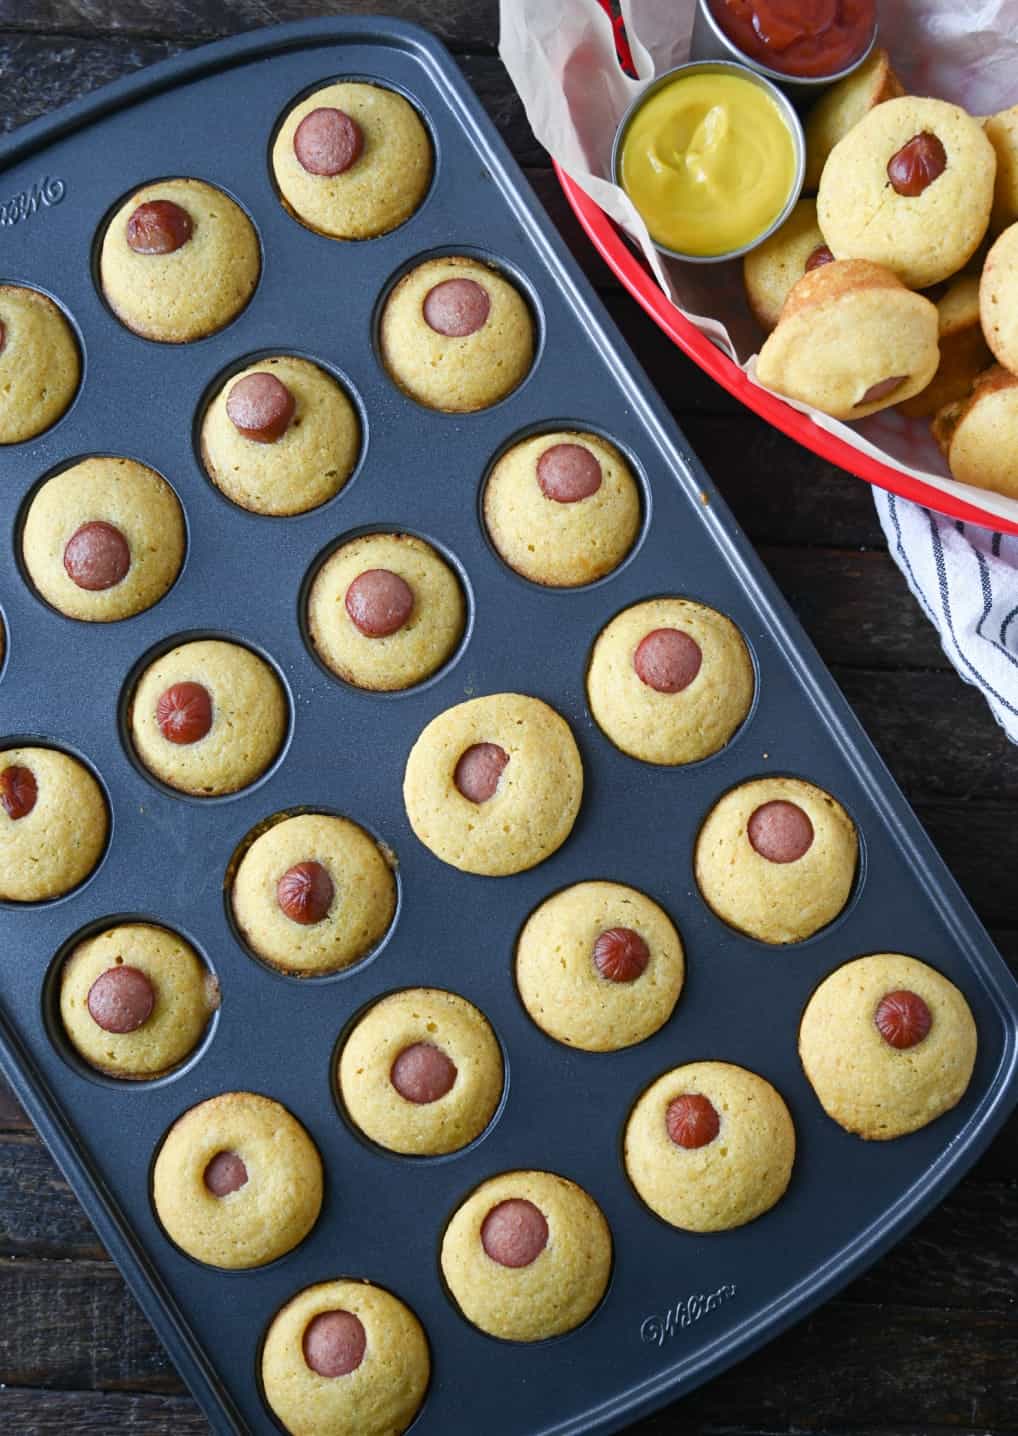 A muffin tin with 24 baked corn bread muffins.